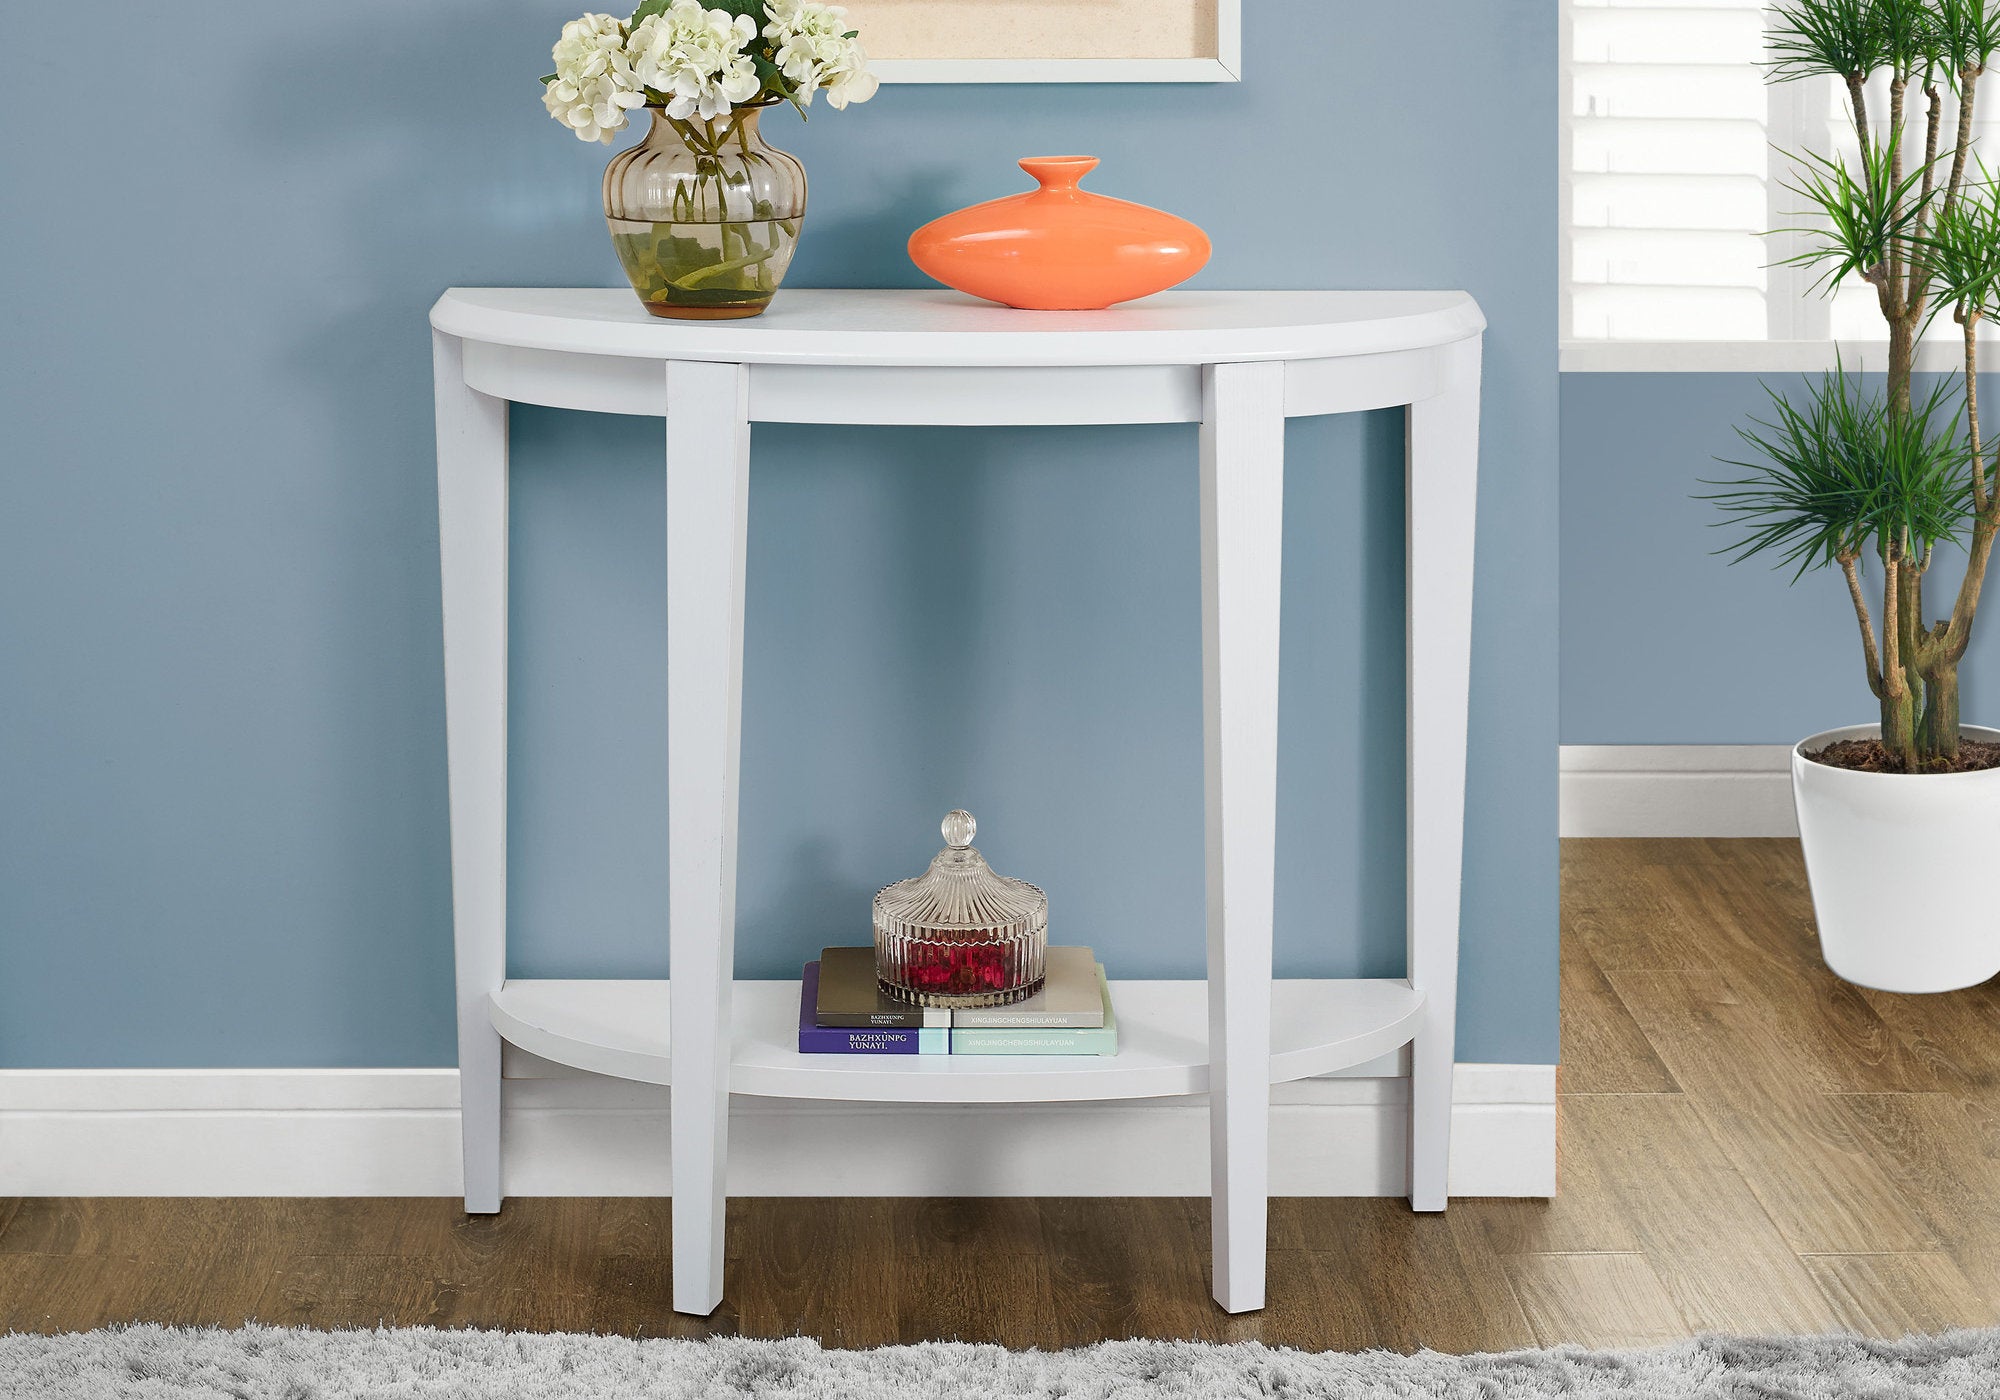 MN-252451    Accent Table, Console, Entryway, Narrow, Sofa, Living Room, Bedroom, Laminate, White, White, Contemporary, Modern